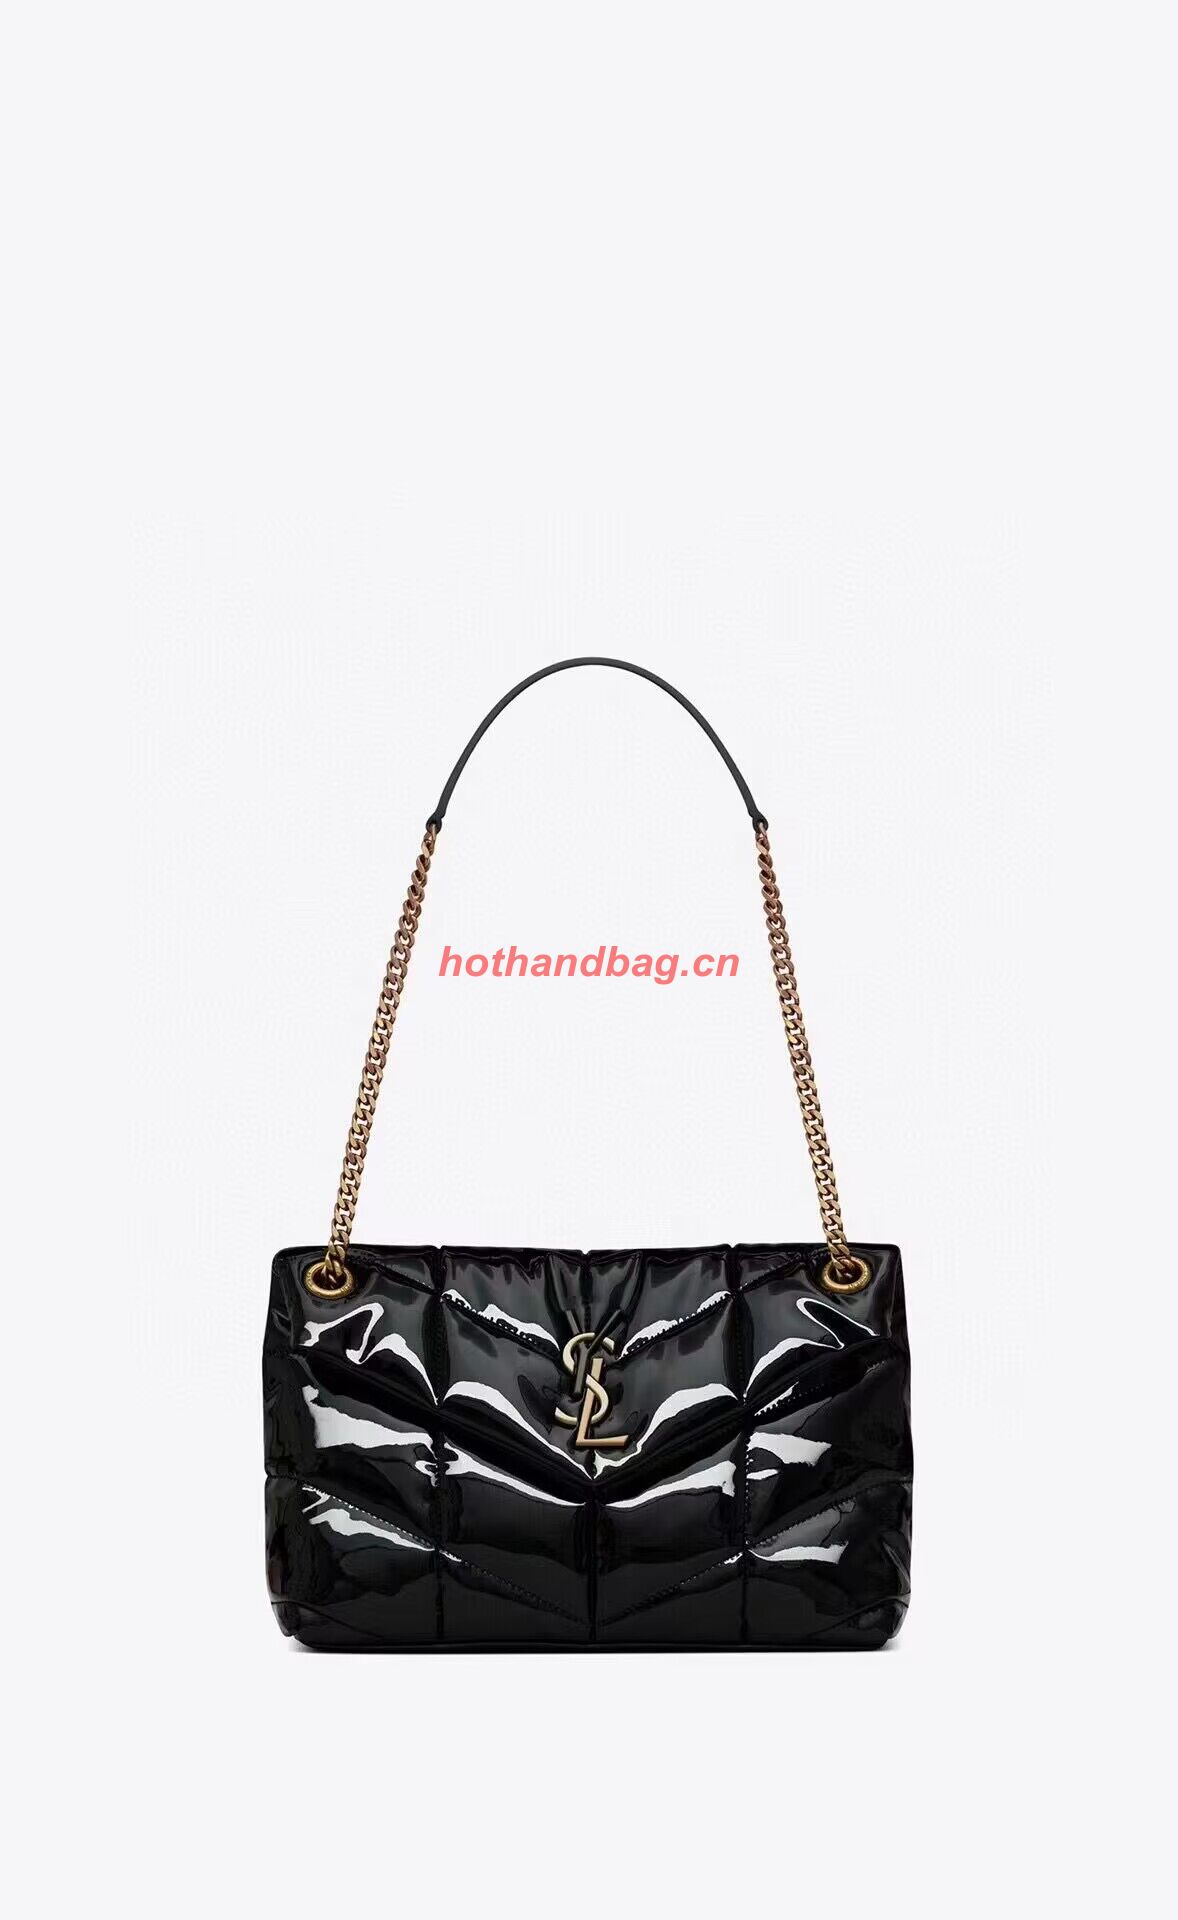 SAINT LAUREN PUFFER SMALL CHAIN BAG IN QUILTED PATENT Y777476 black